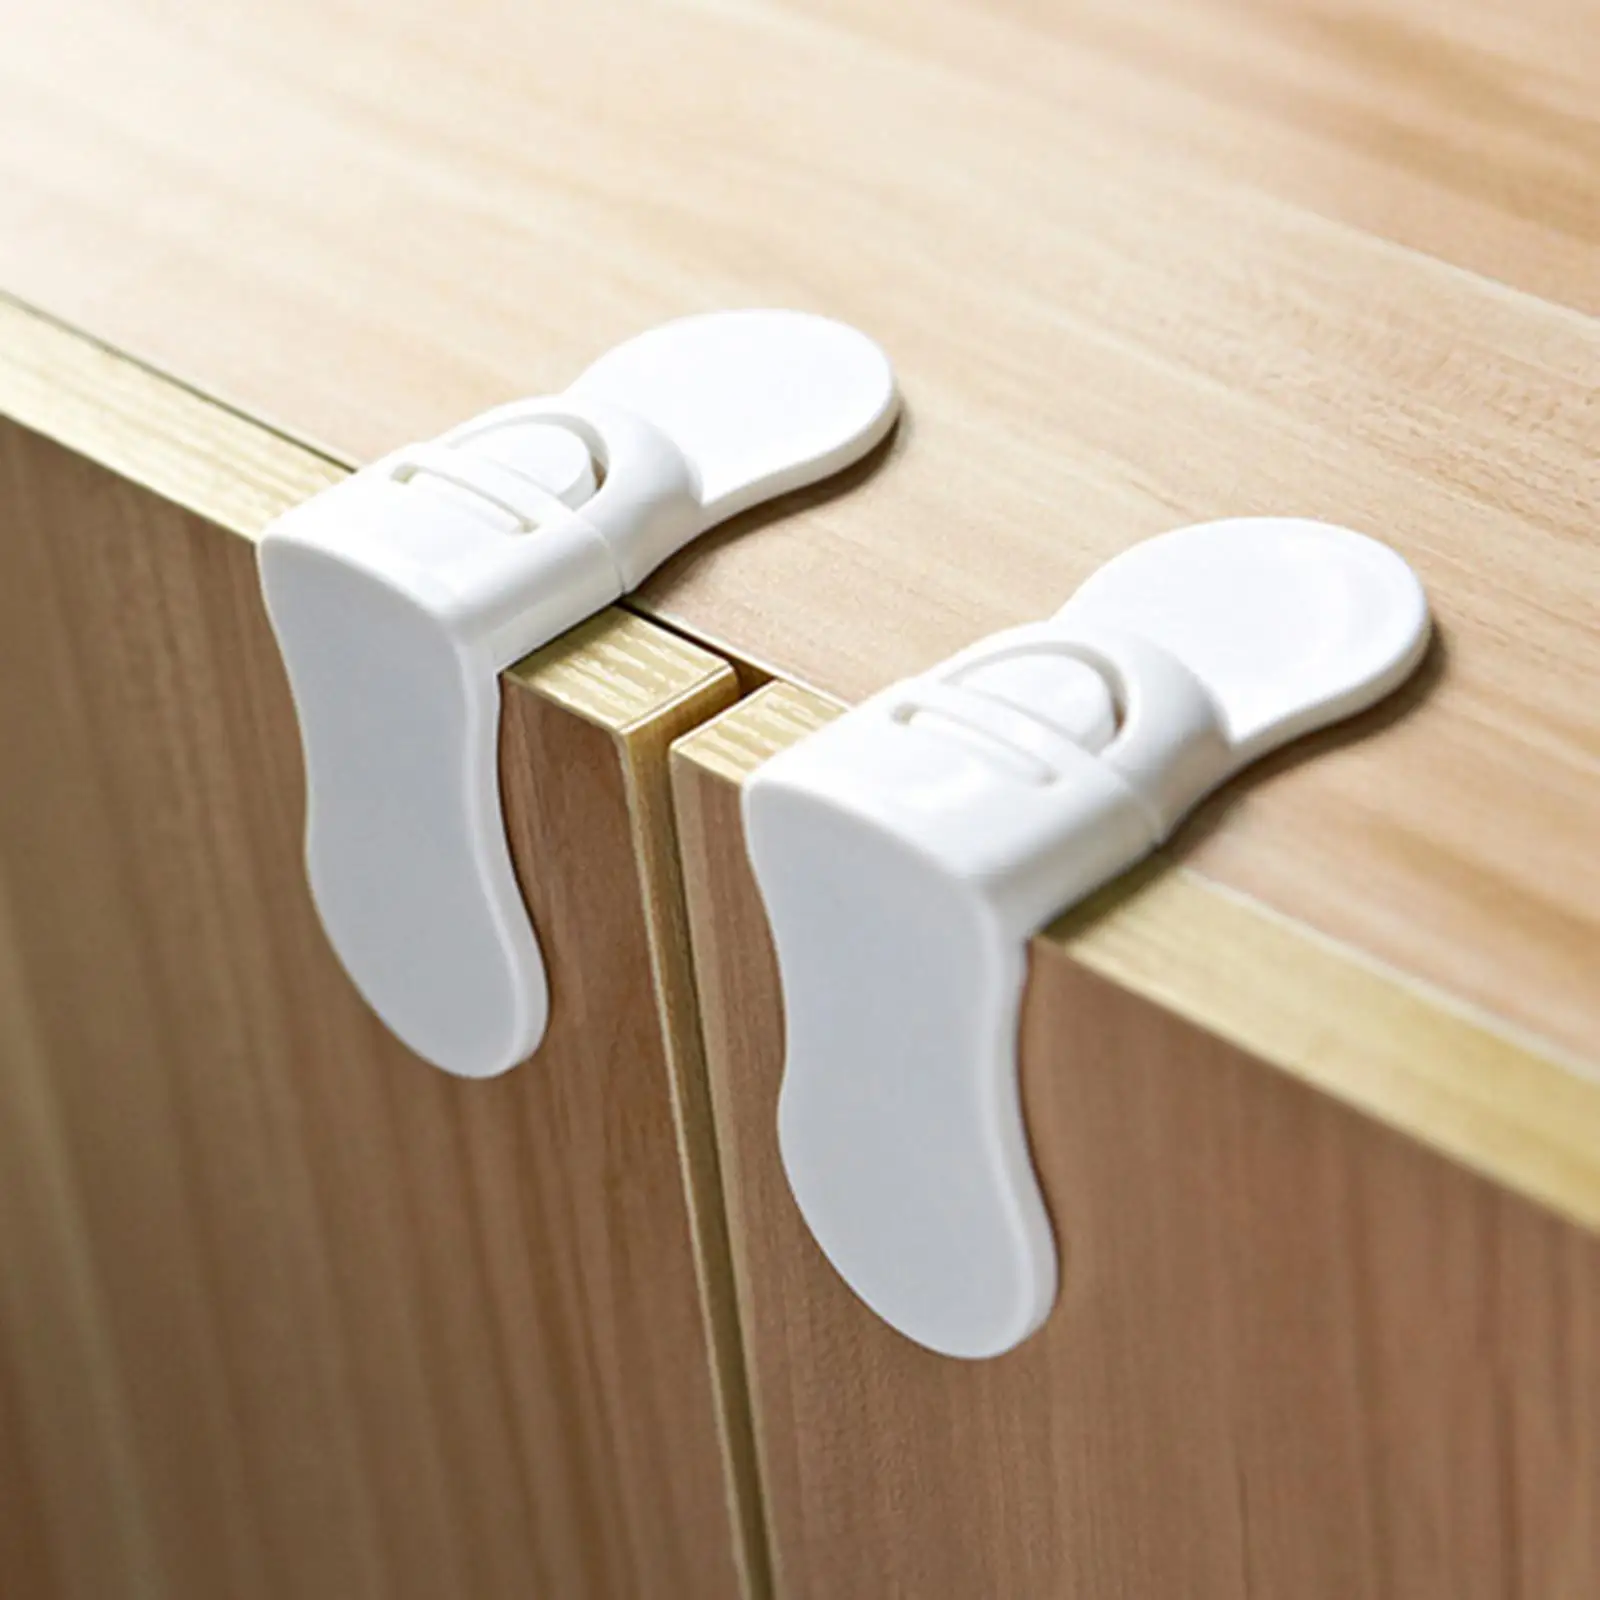 2x Houshold Baby Proofing Cabinet Locks Cabinet Locks for Bathroom Drawers